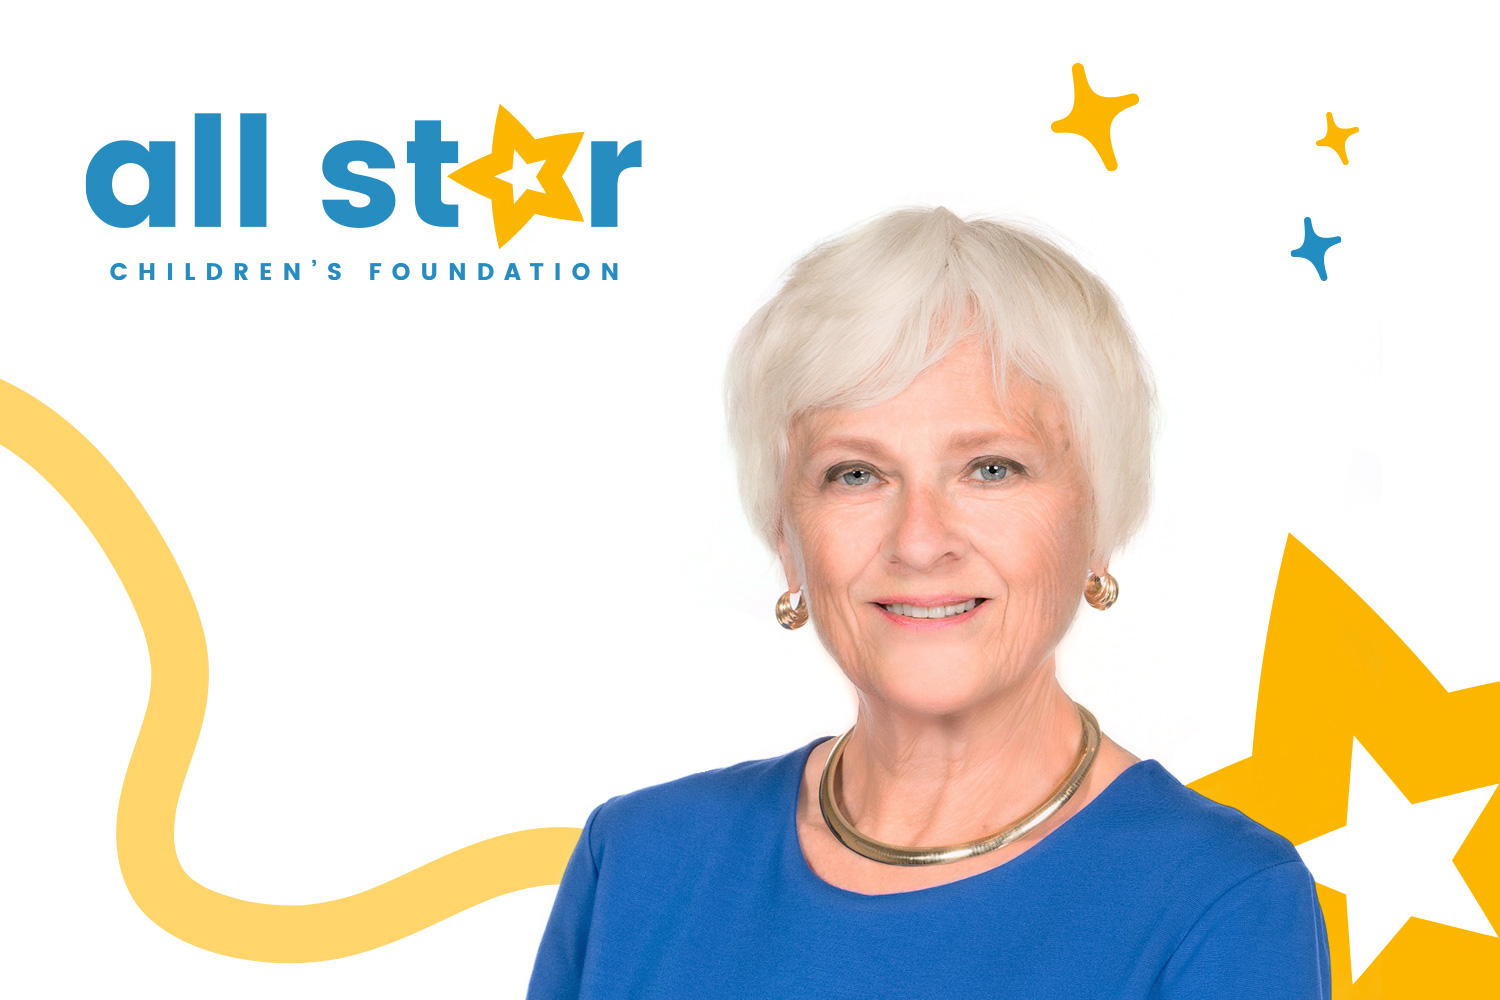 All Star Children’s Foundation Welcomes Karen A. Holbrook to its Board of Directors